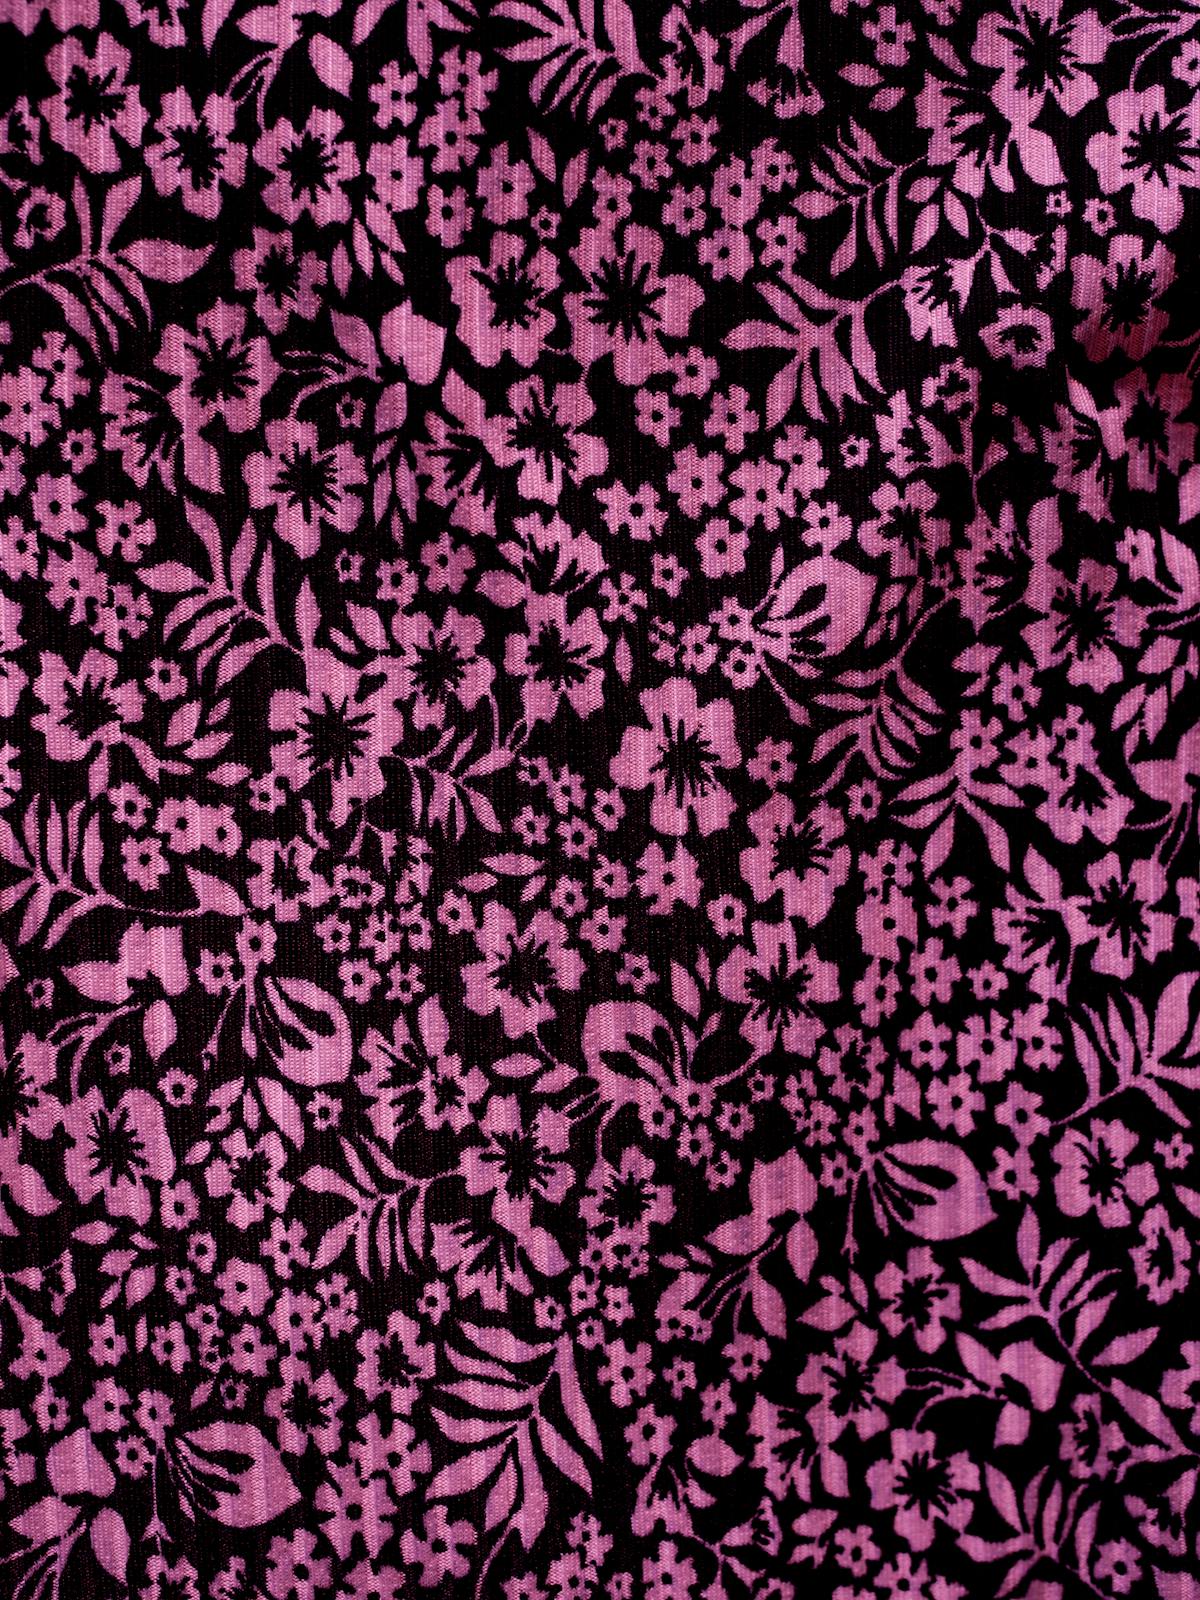 Floral Pattern Photos, Download The BEST Free Floral Pattern Stock ...